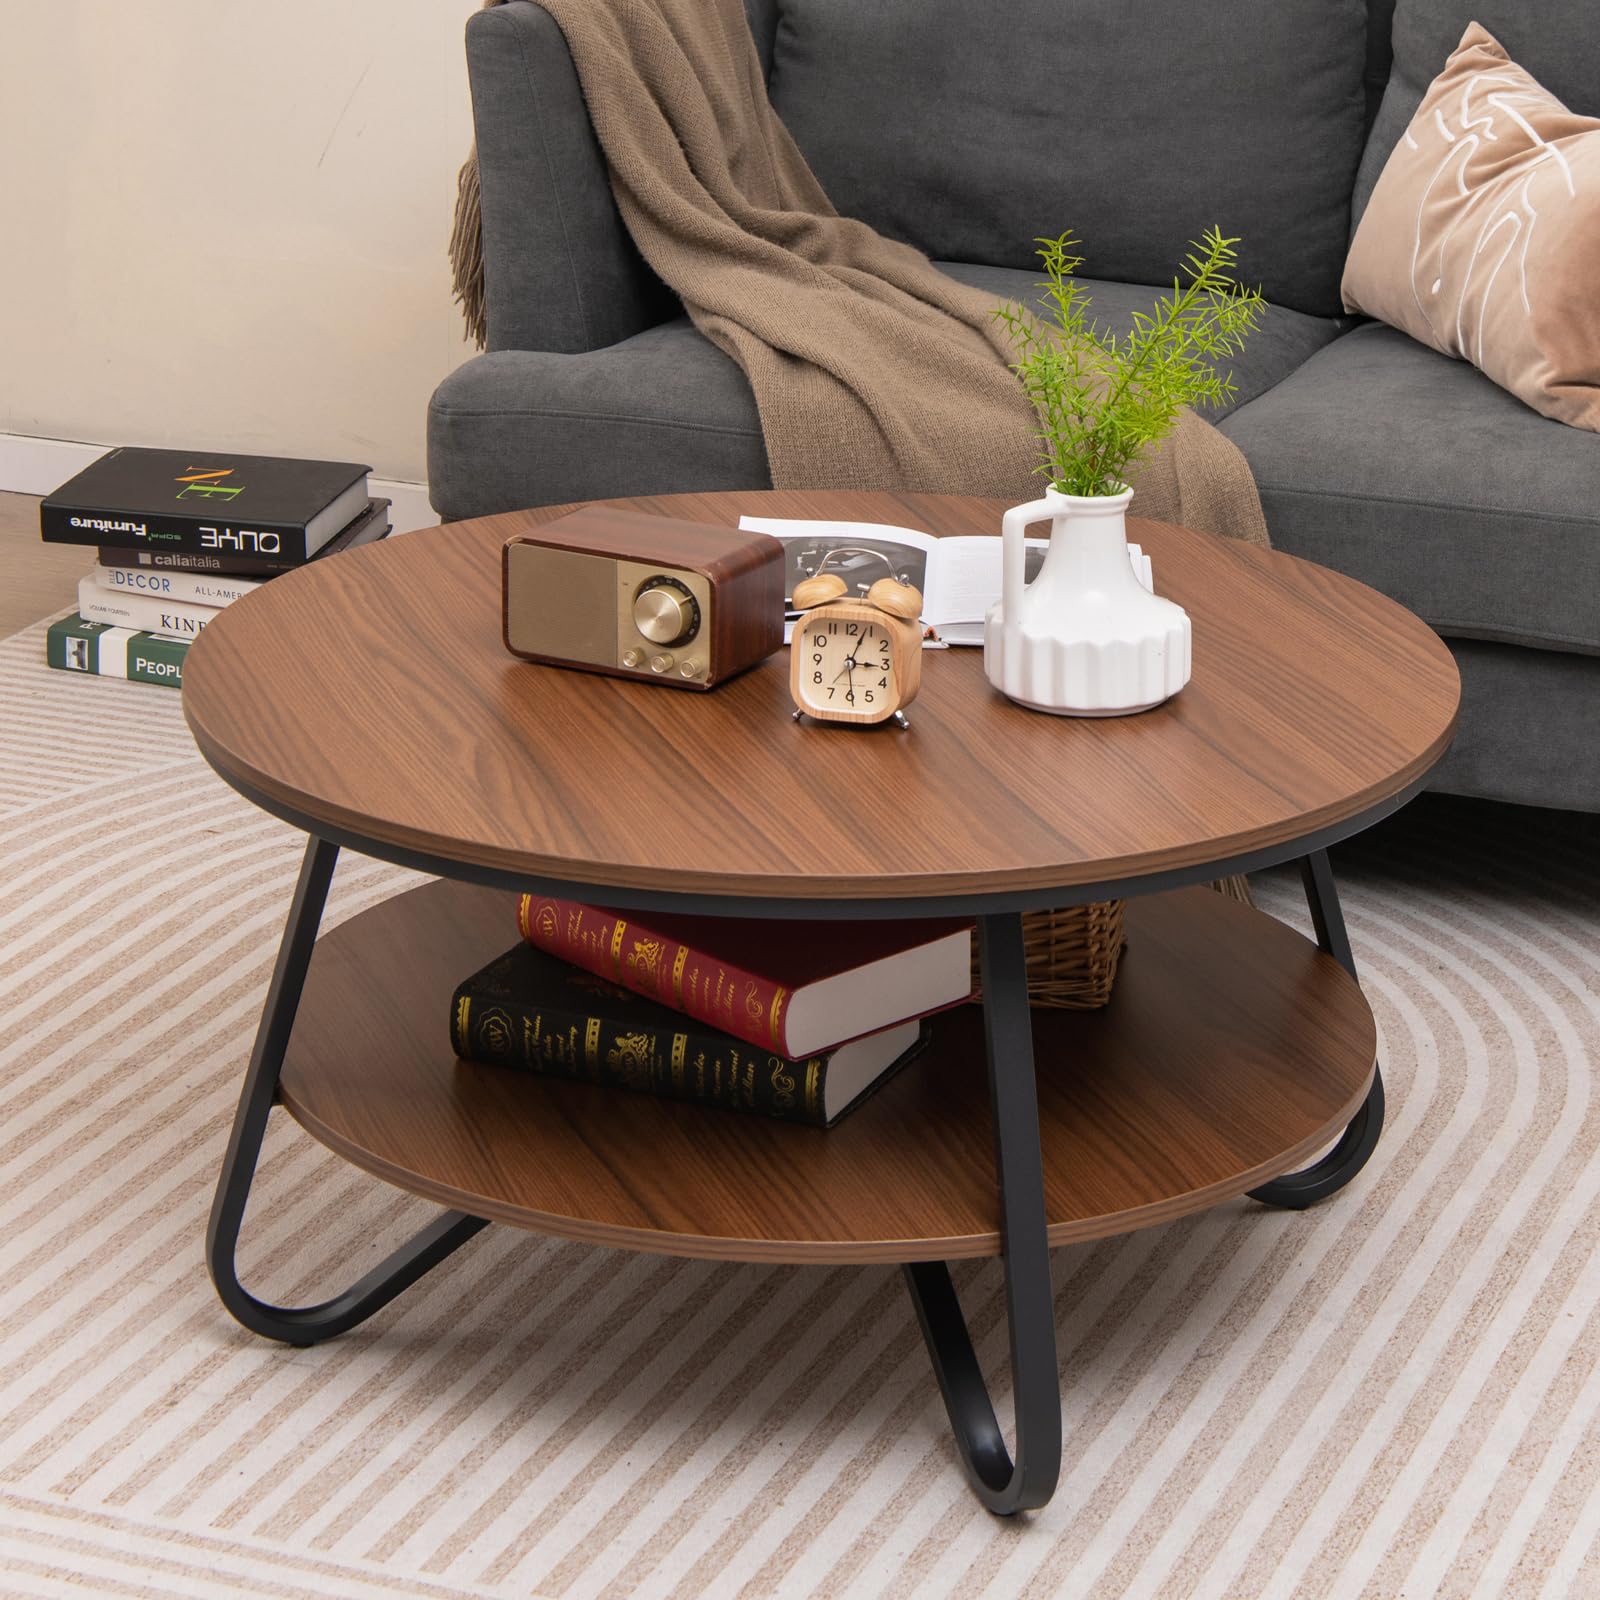 Giantex 2-Tier Round Coffee Table, 33.5" Wood Coffee Table with Open Storage Shelf